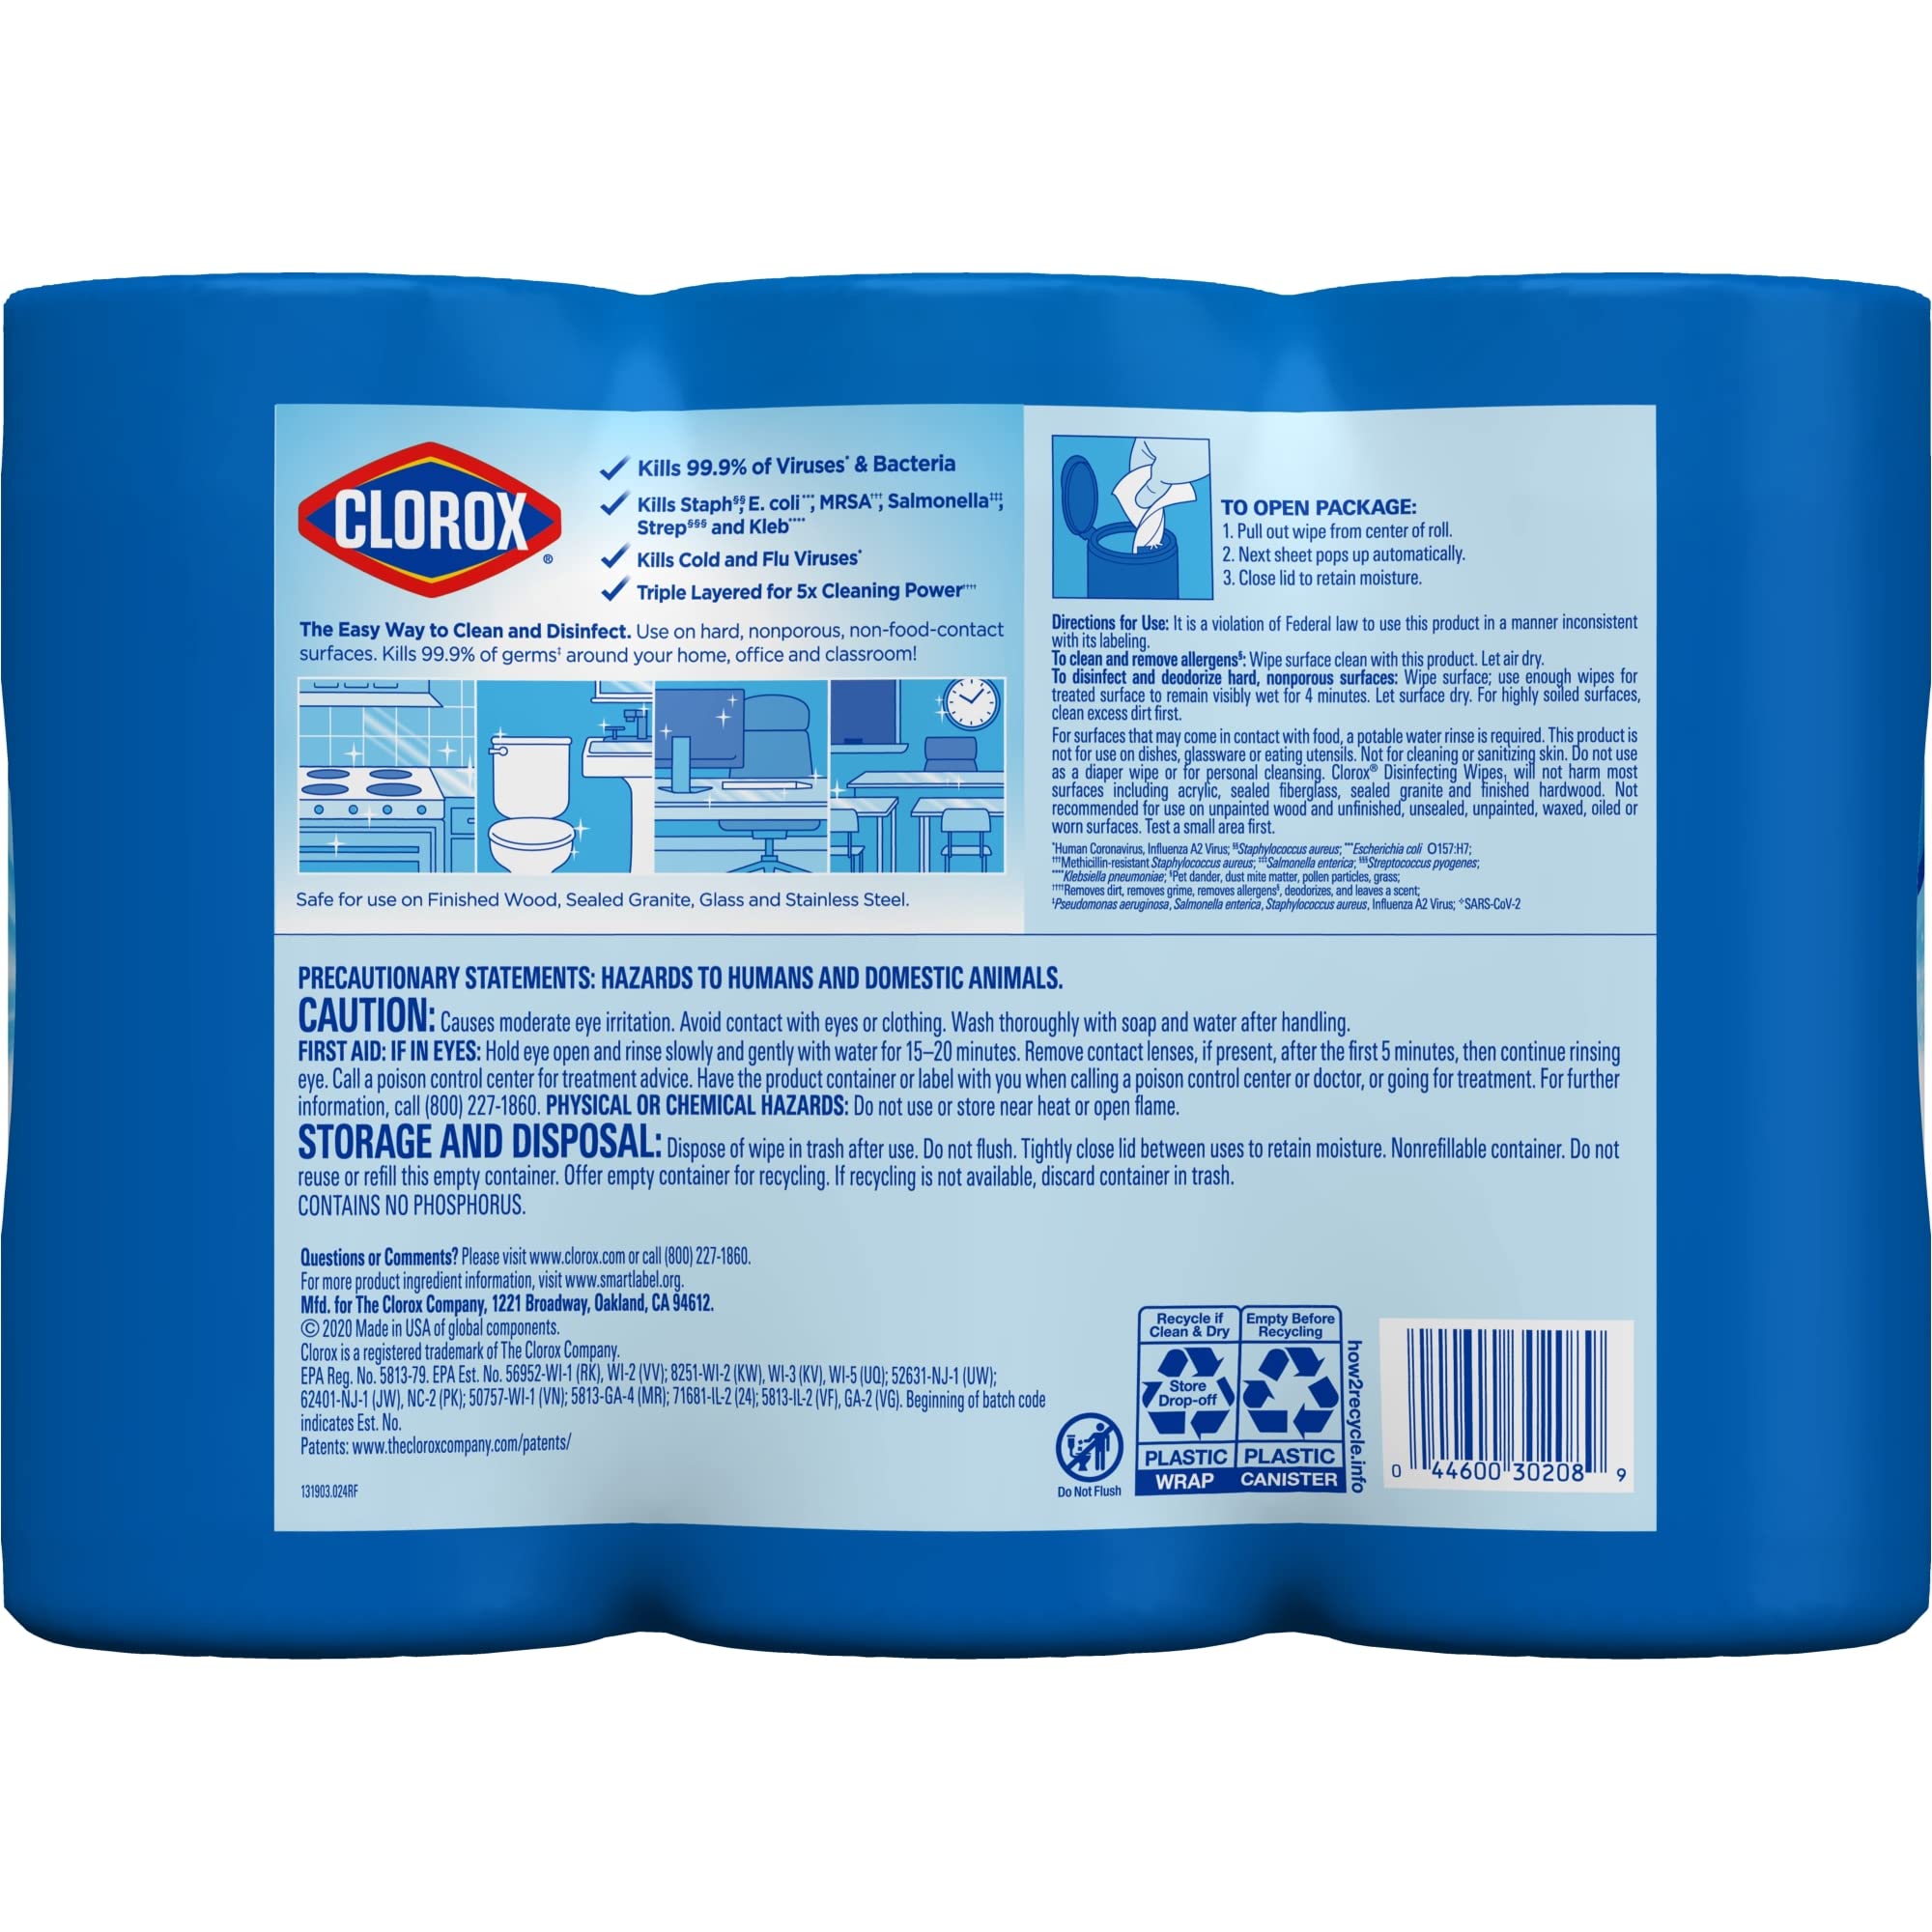 Clorox 30208 Disinfecting Wipes Value Pack 225 Count